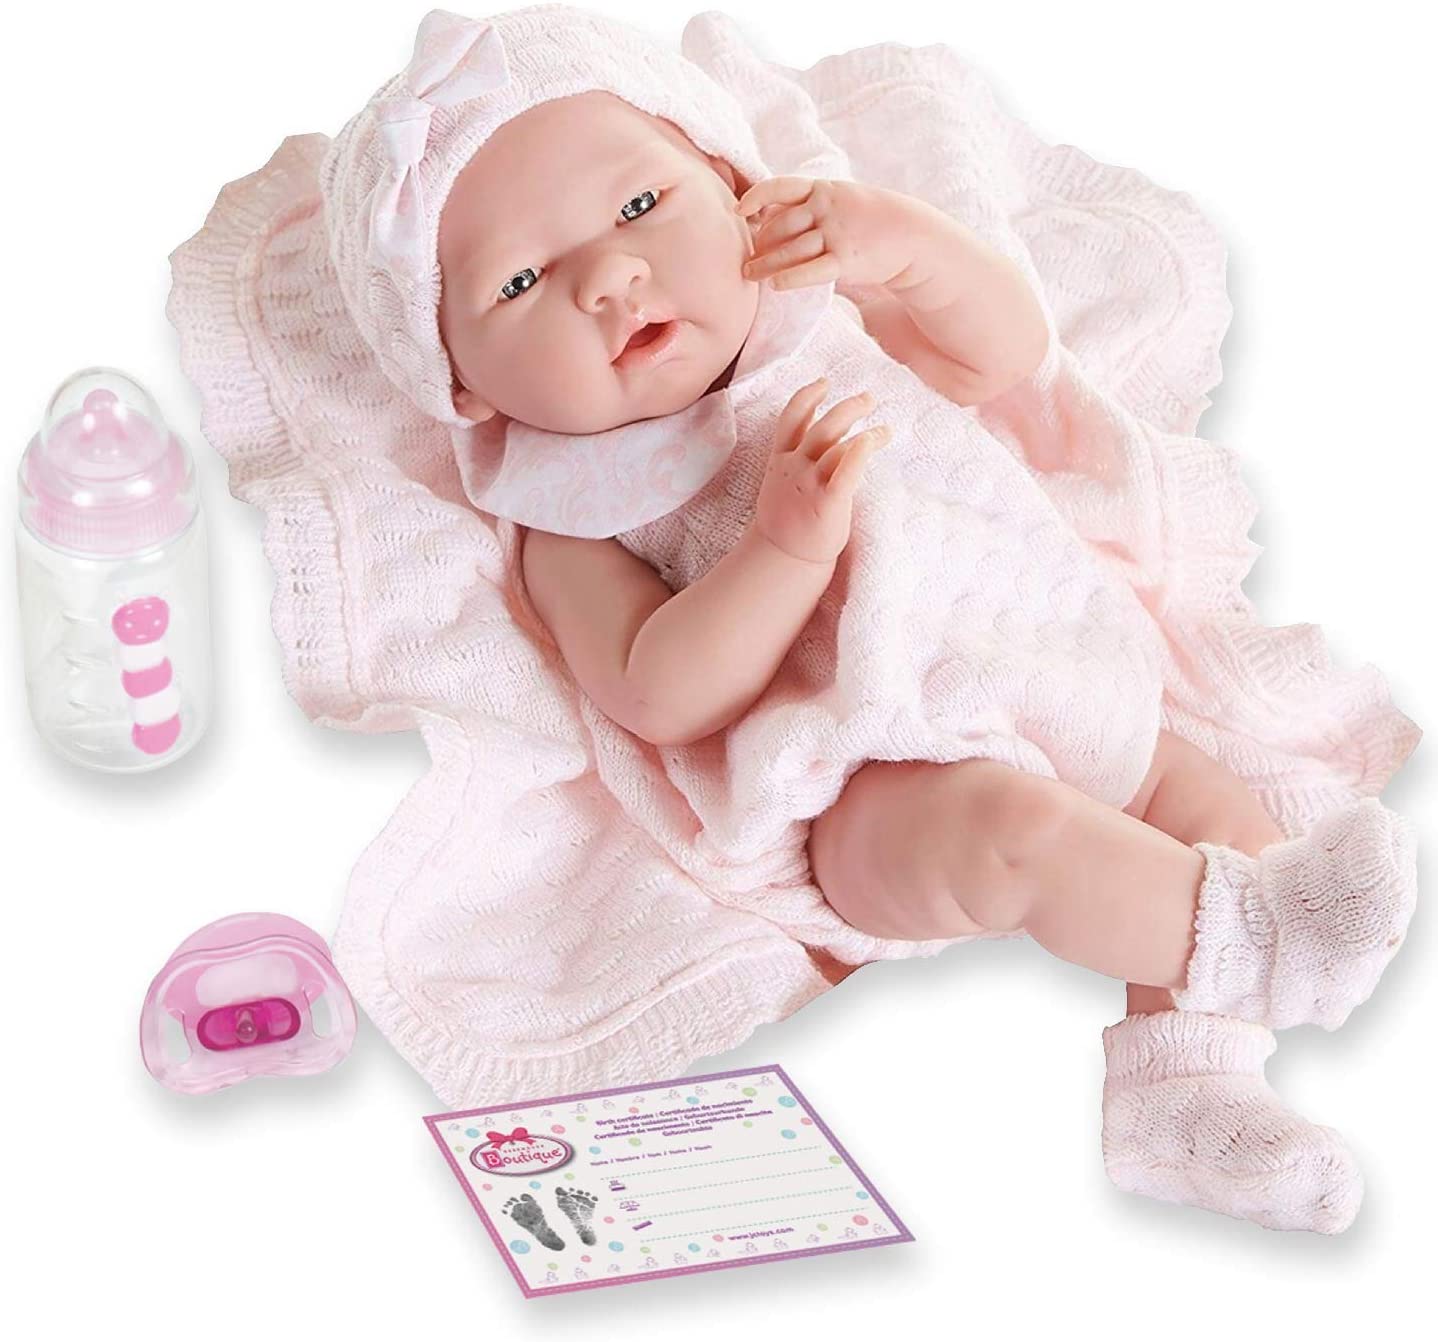 JC Toys Realistic Infant Doll For 7-Year-Old Girls